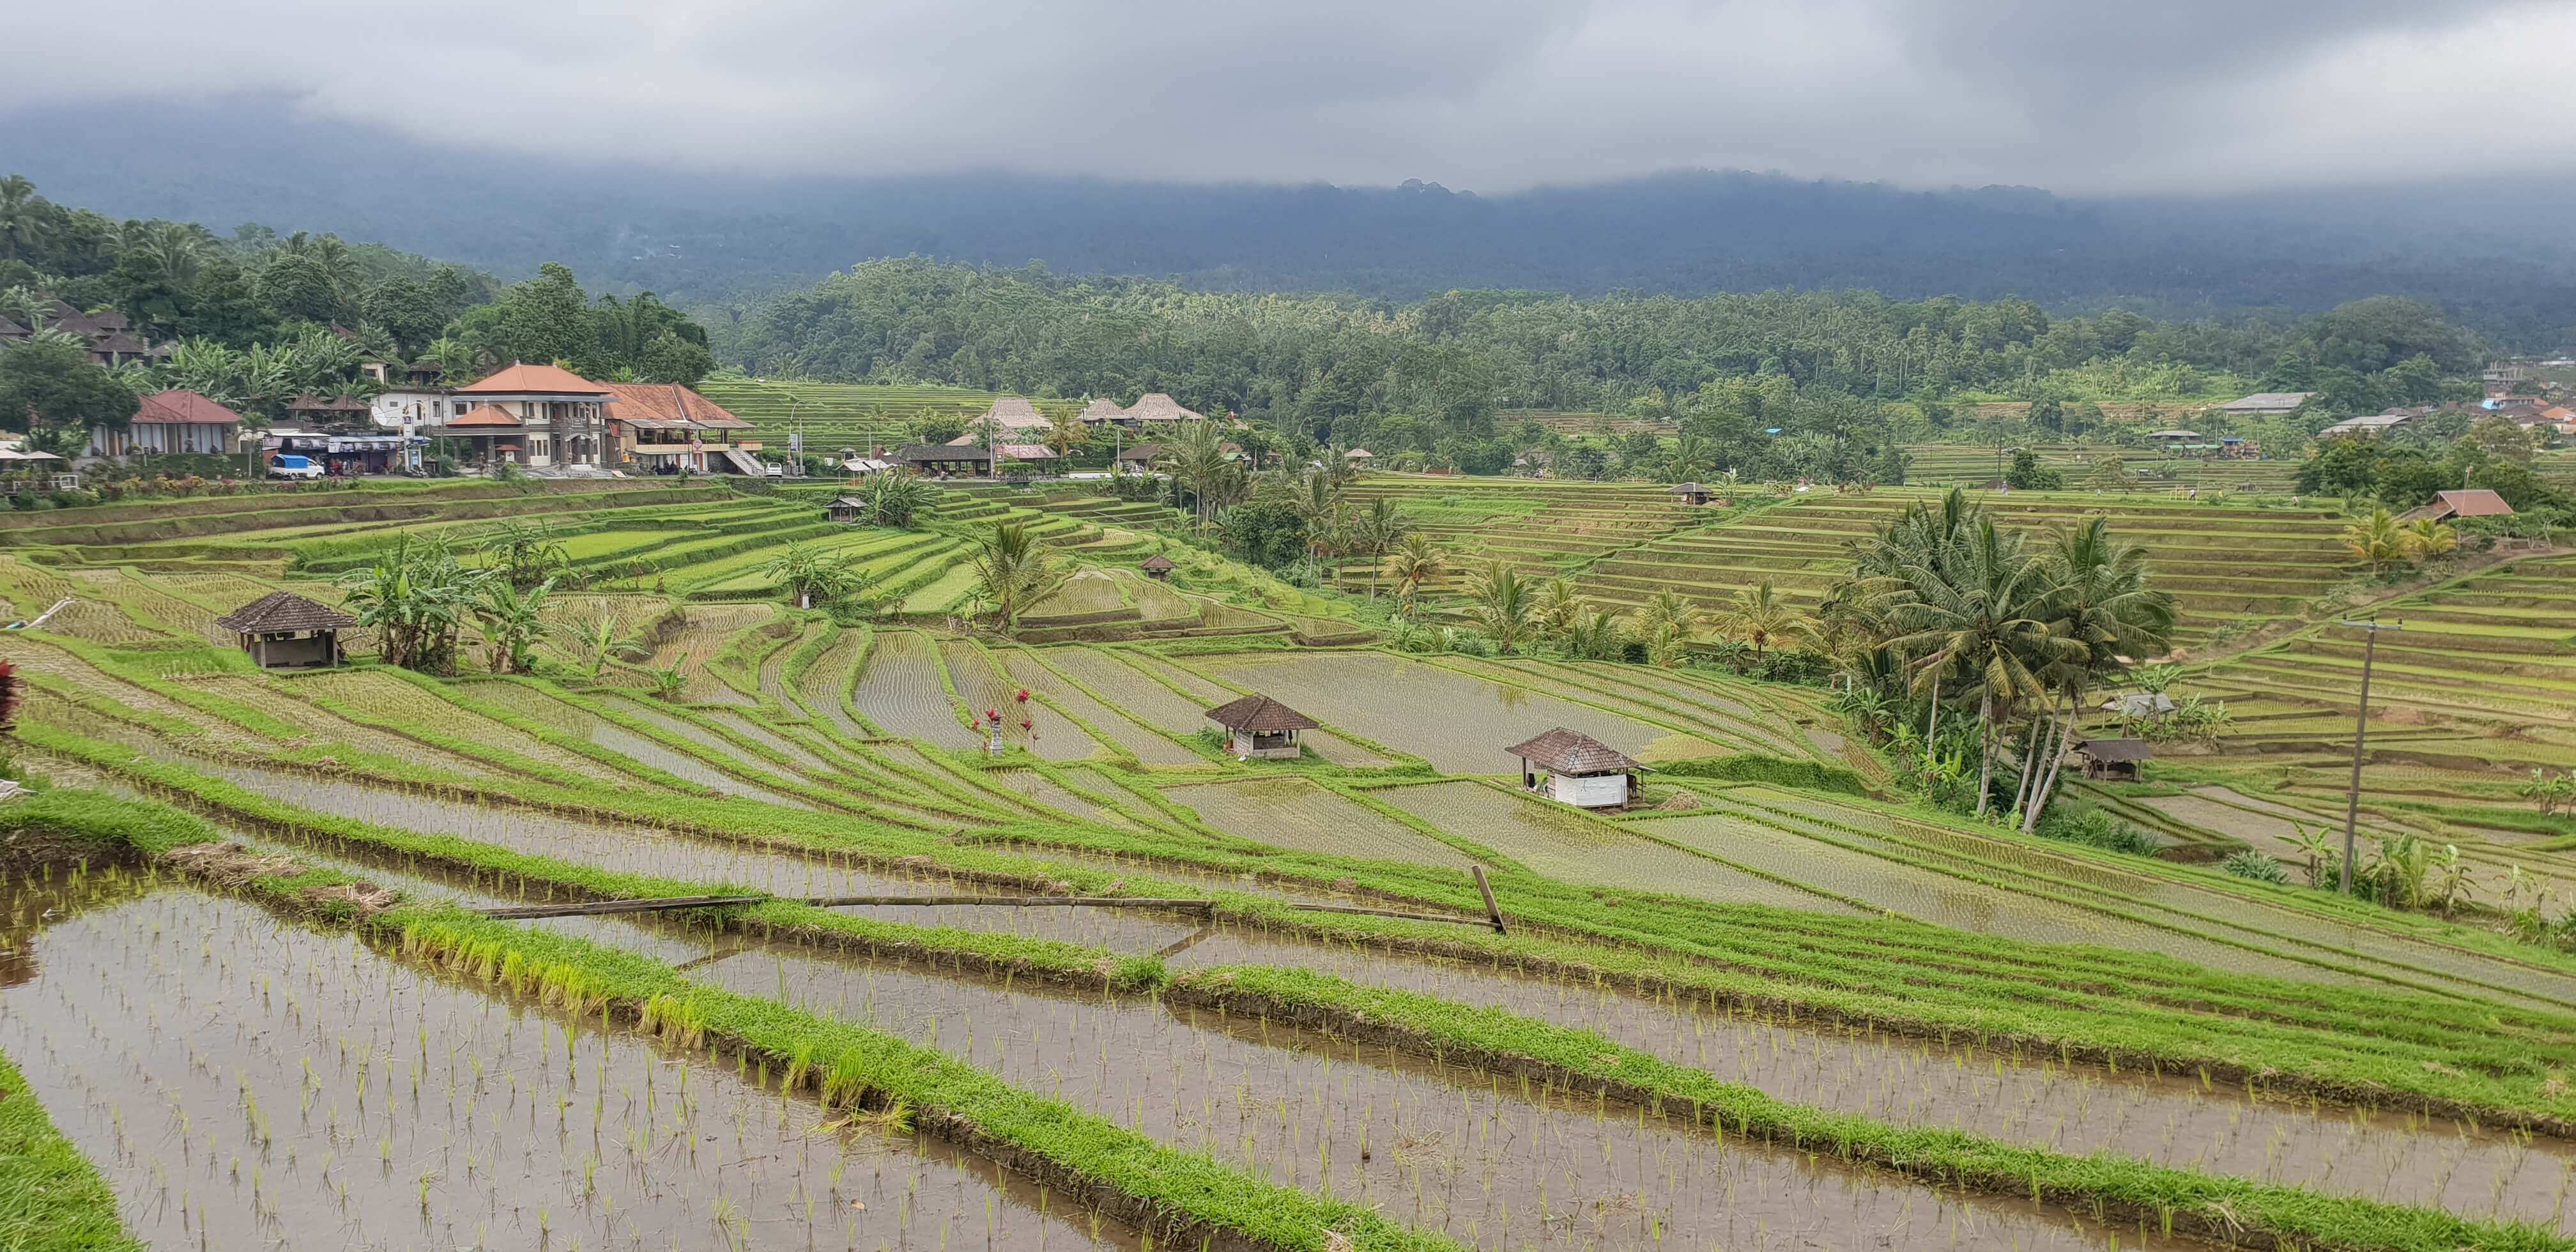 Jatiluwih Green Land rice terrace is a stunning UNESCO World Heritage site which makes it a must-visit in the Ubud itinerary